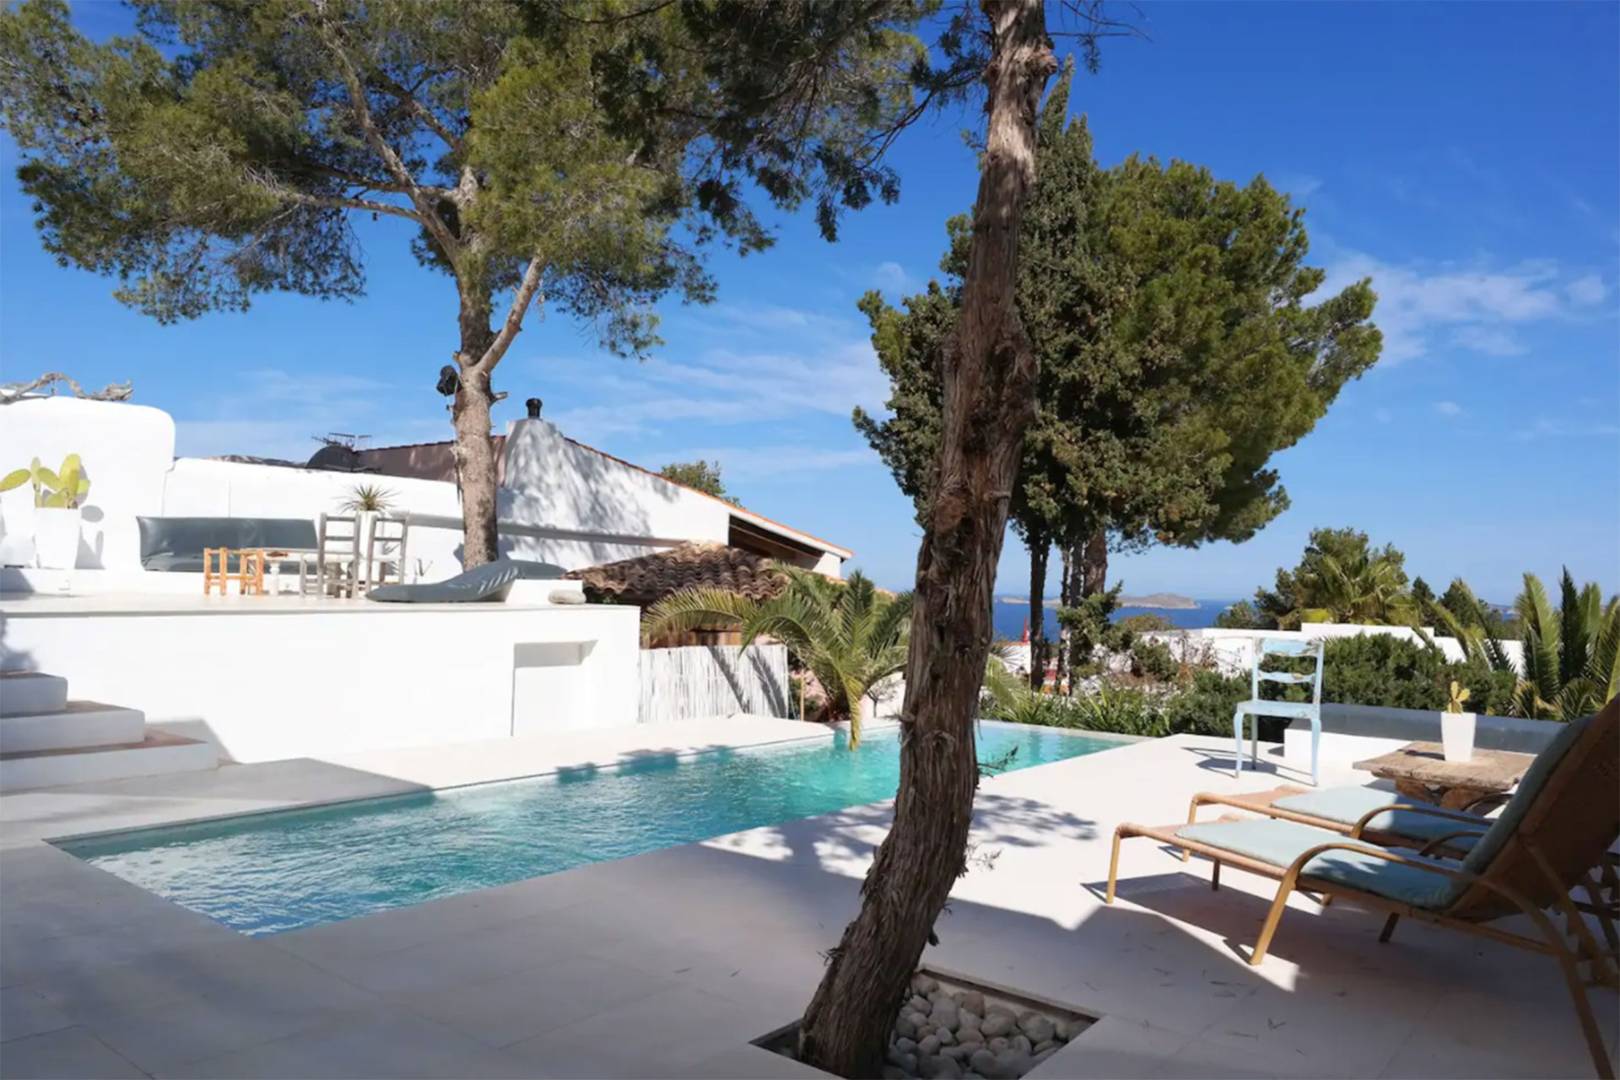 11 Best Airbnbs In Ibiza: Ibiza Airbnbs To Book Now | Glamour UK